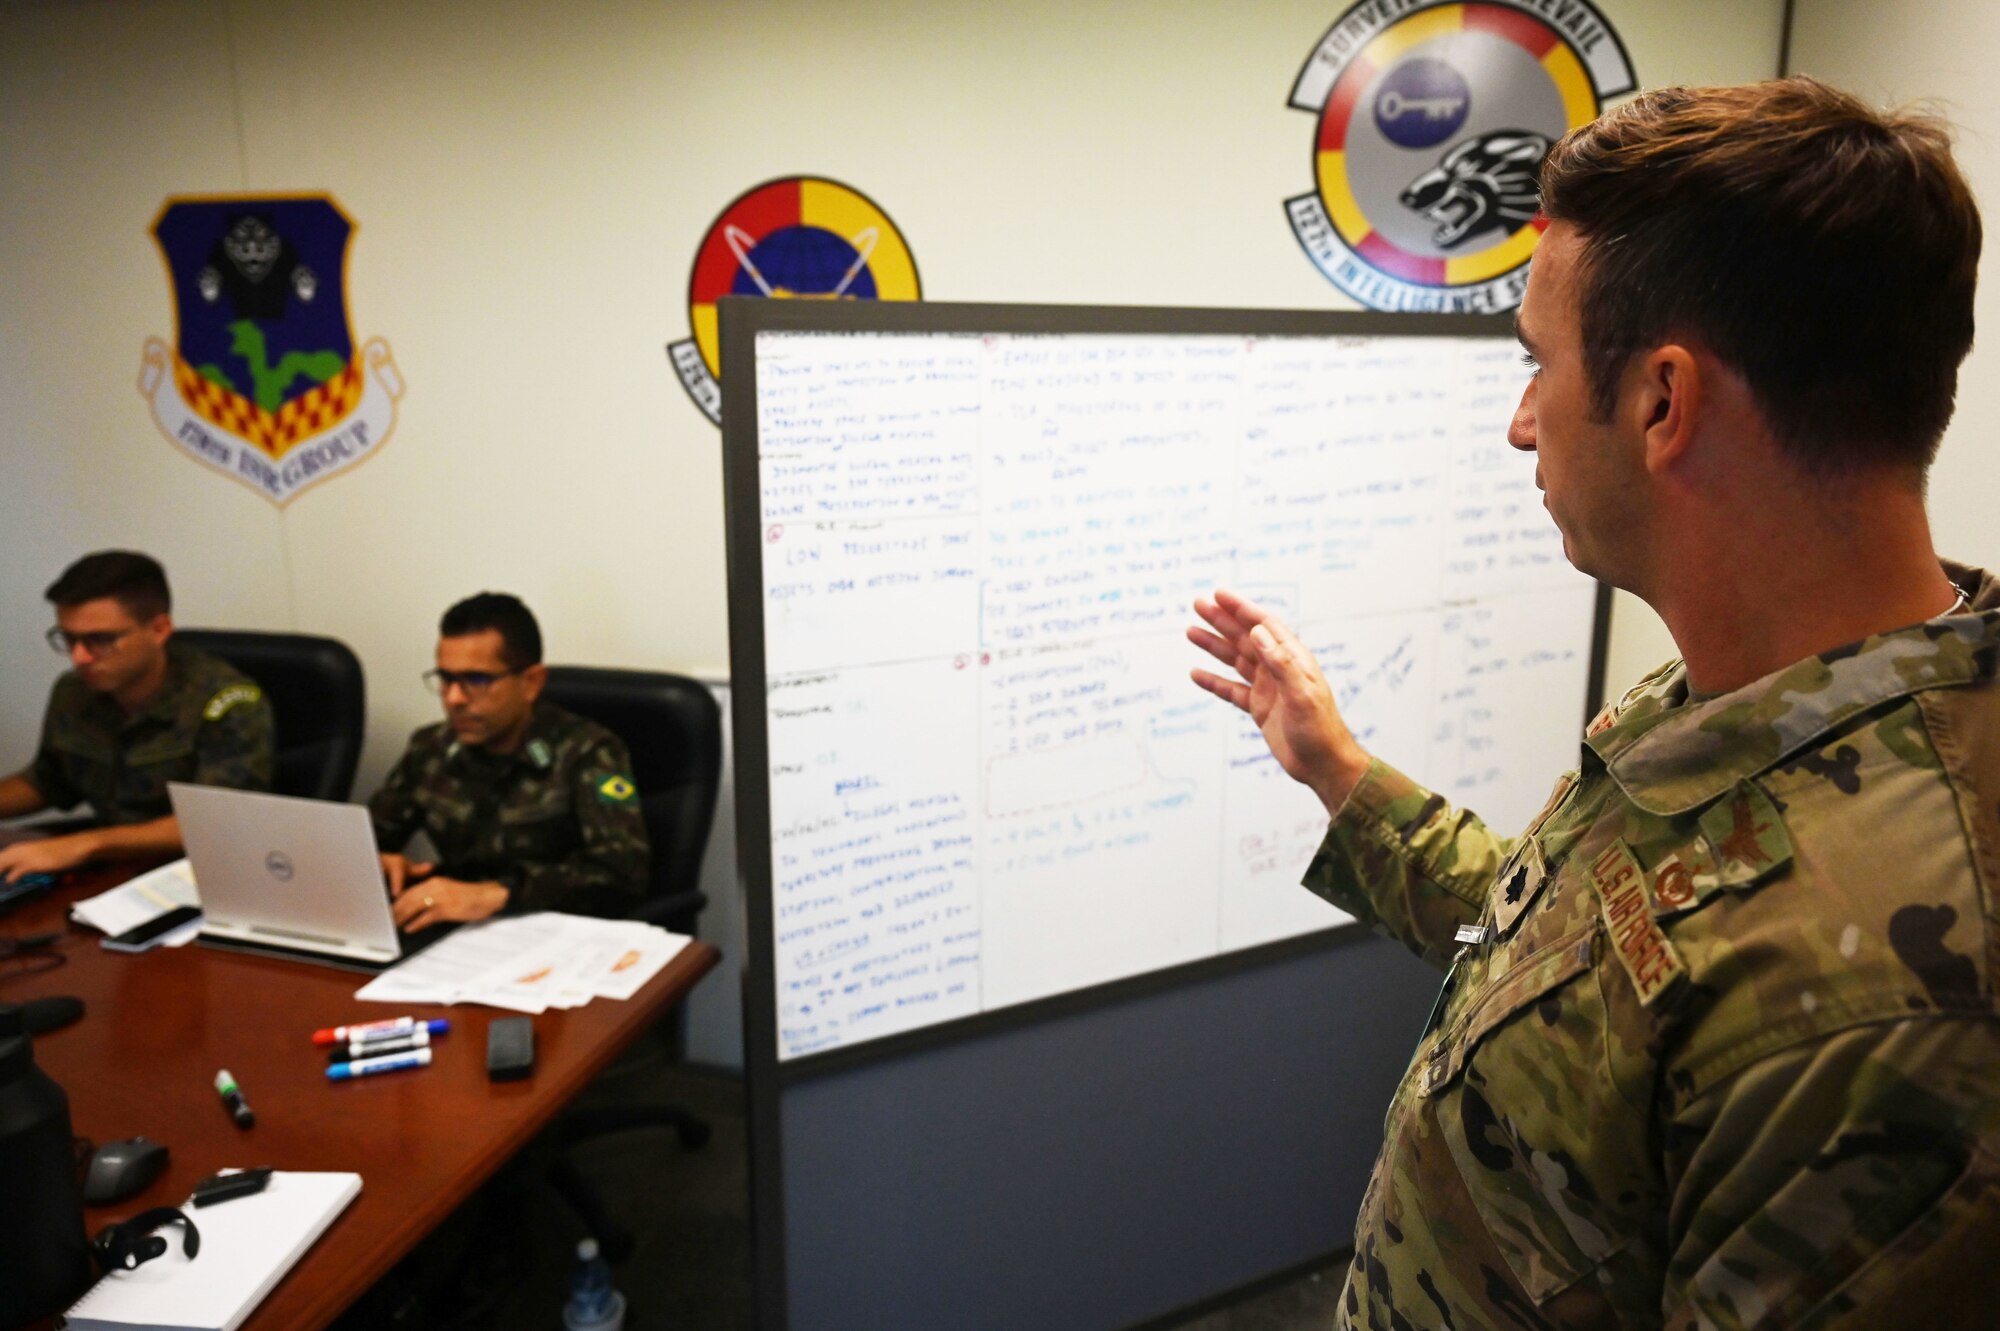 Lt. Col. Graziano goes over the days exercise with Brazilian military personnel.